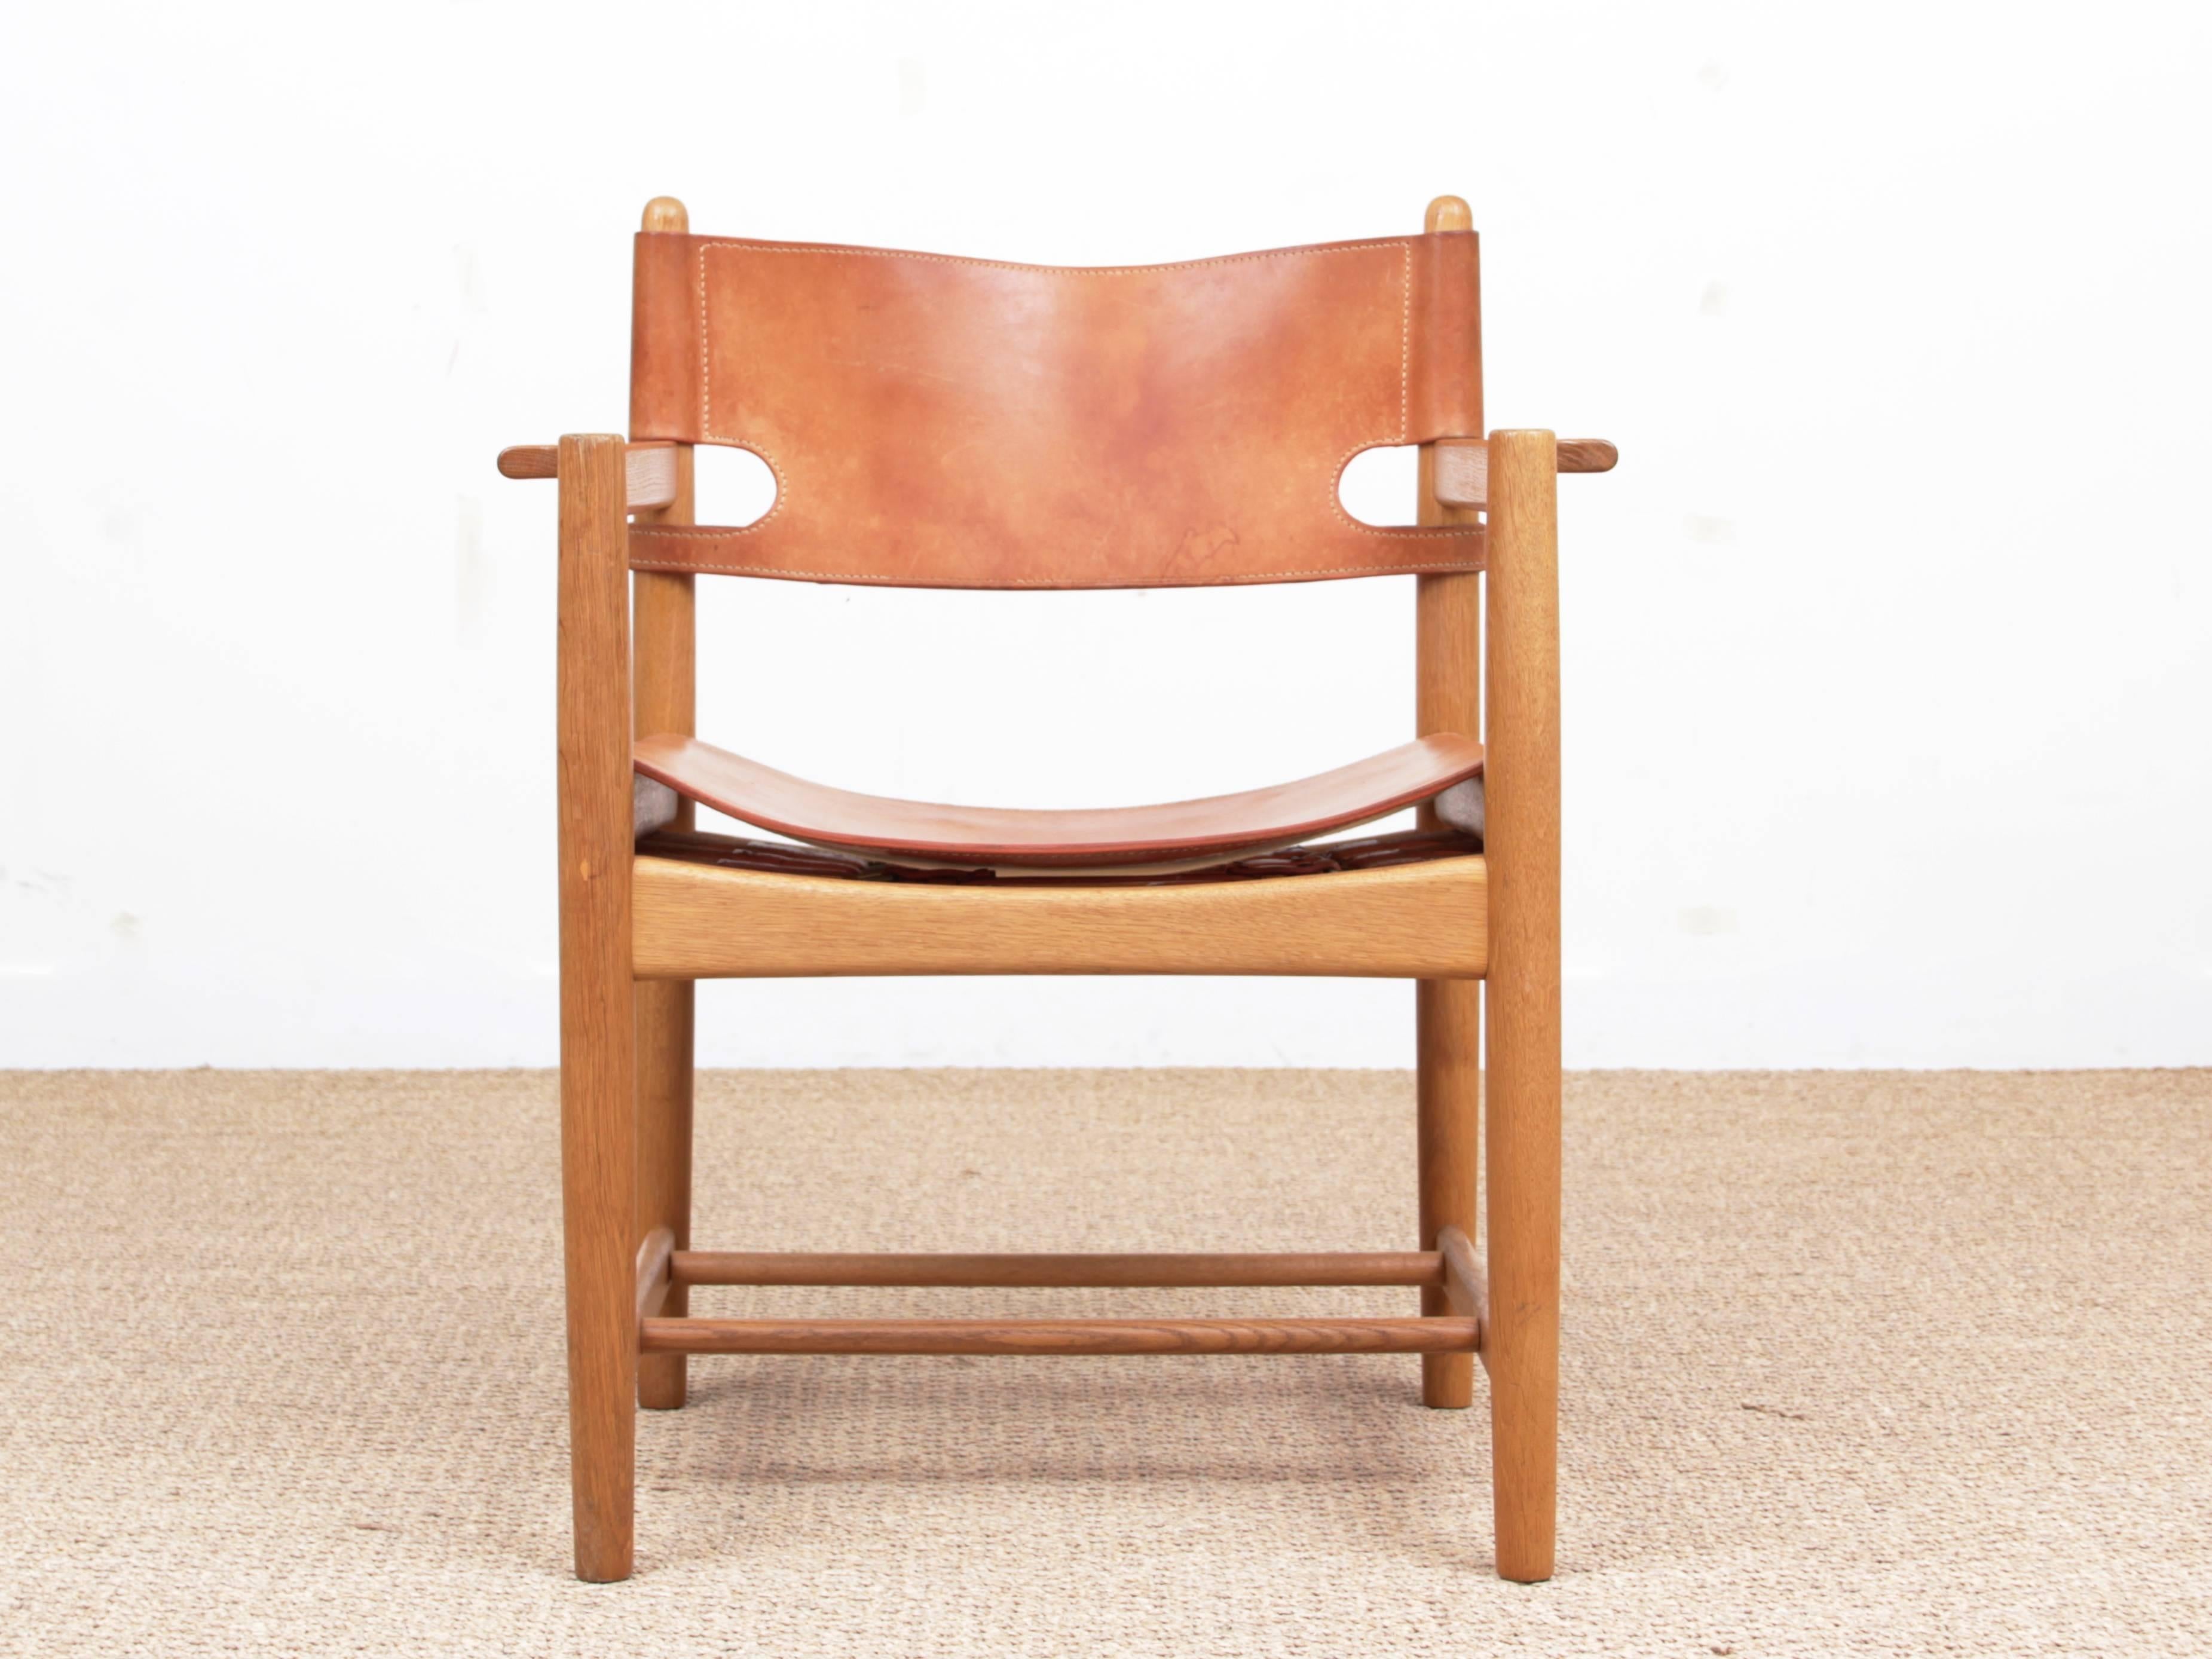 Mid-Century Modern Scandinavian pair of arm chairs model 3238 by Børge Mogensen for Fredericia Furniture. Solid laquered oak and leather. Piece bought in 1970. Initially produced by cabinet maker Erhard Rasmussen, it has been later produced by